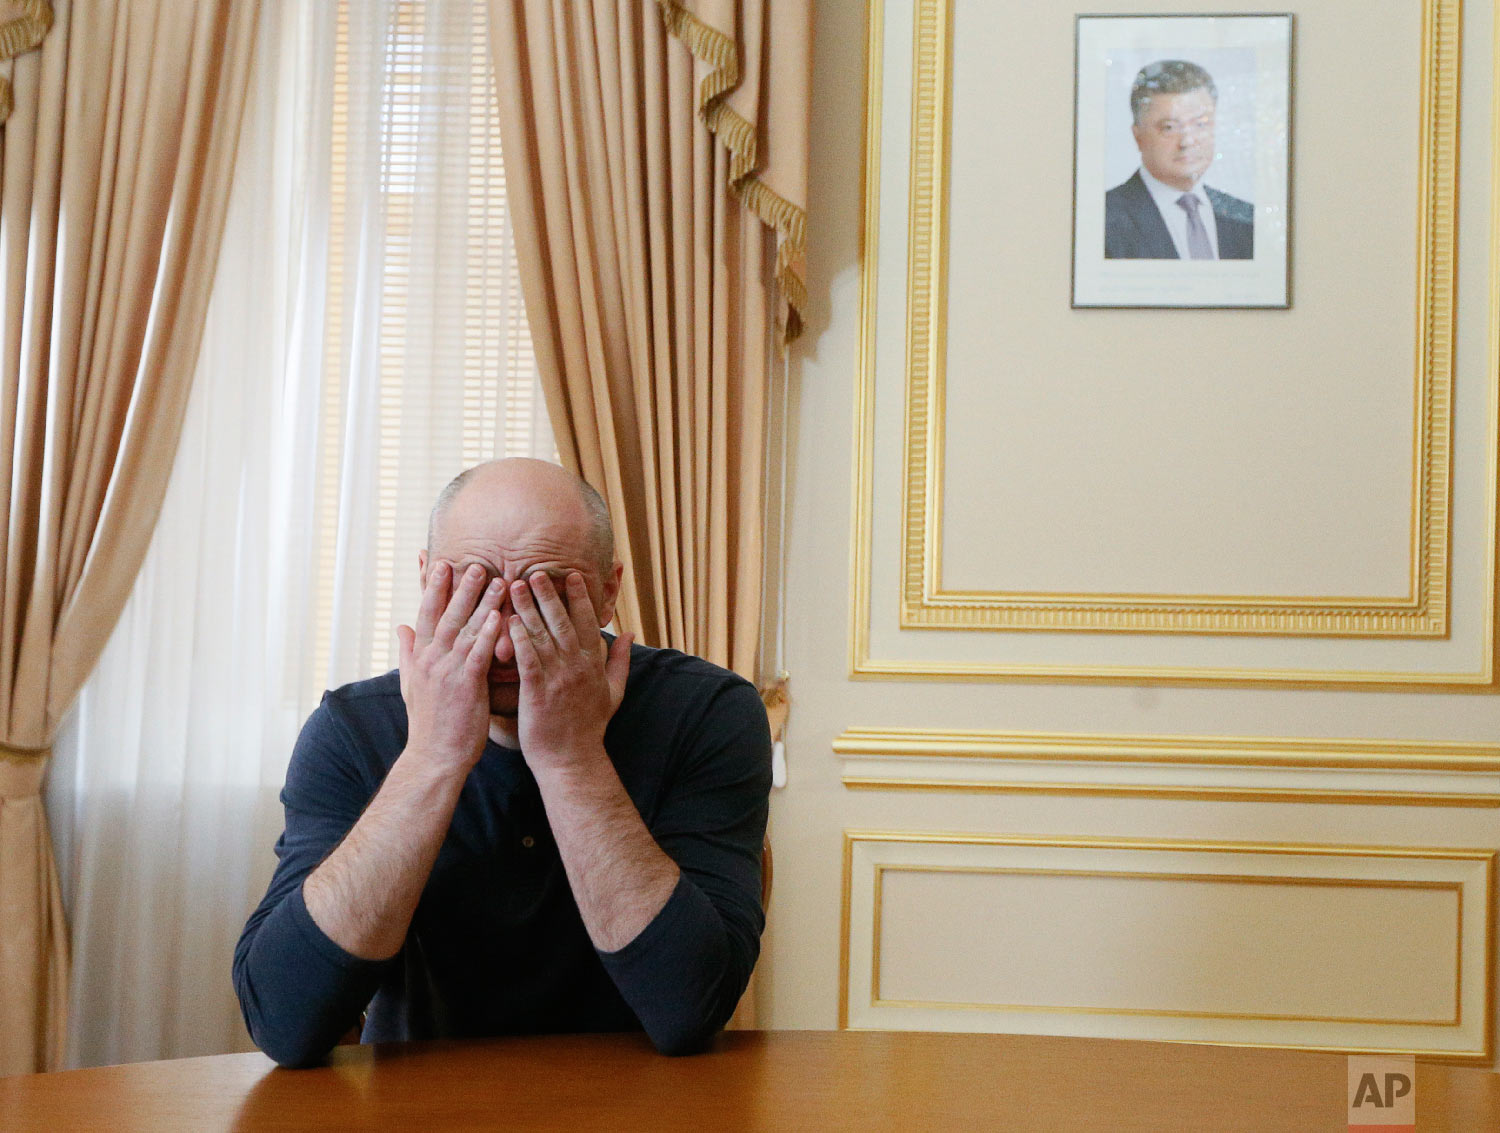  Russian journalist Arkady Babchenko holds his face during an interview with foreign media, with the portrait of Ukrainian President Petro Poroshenko, right in the background, in Kiev, Ukraine on May 31, 2018. (Valentyn Ogirenko/Pool Photo via AP) 